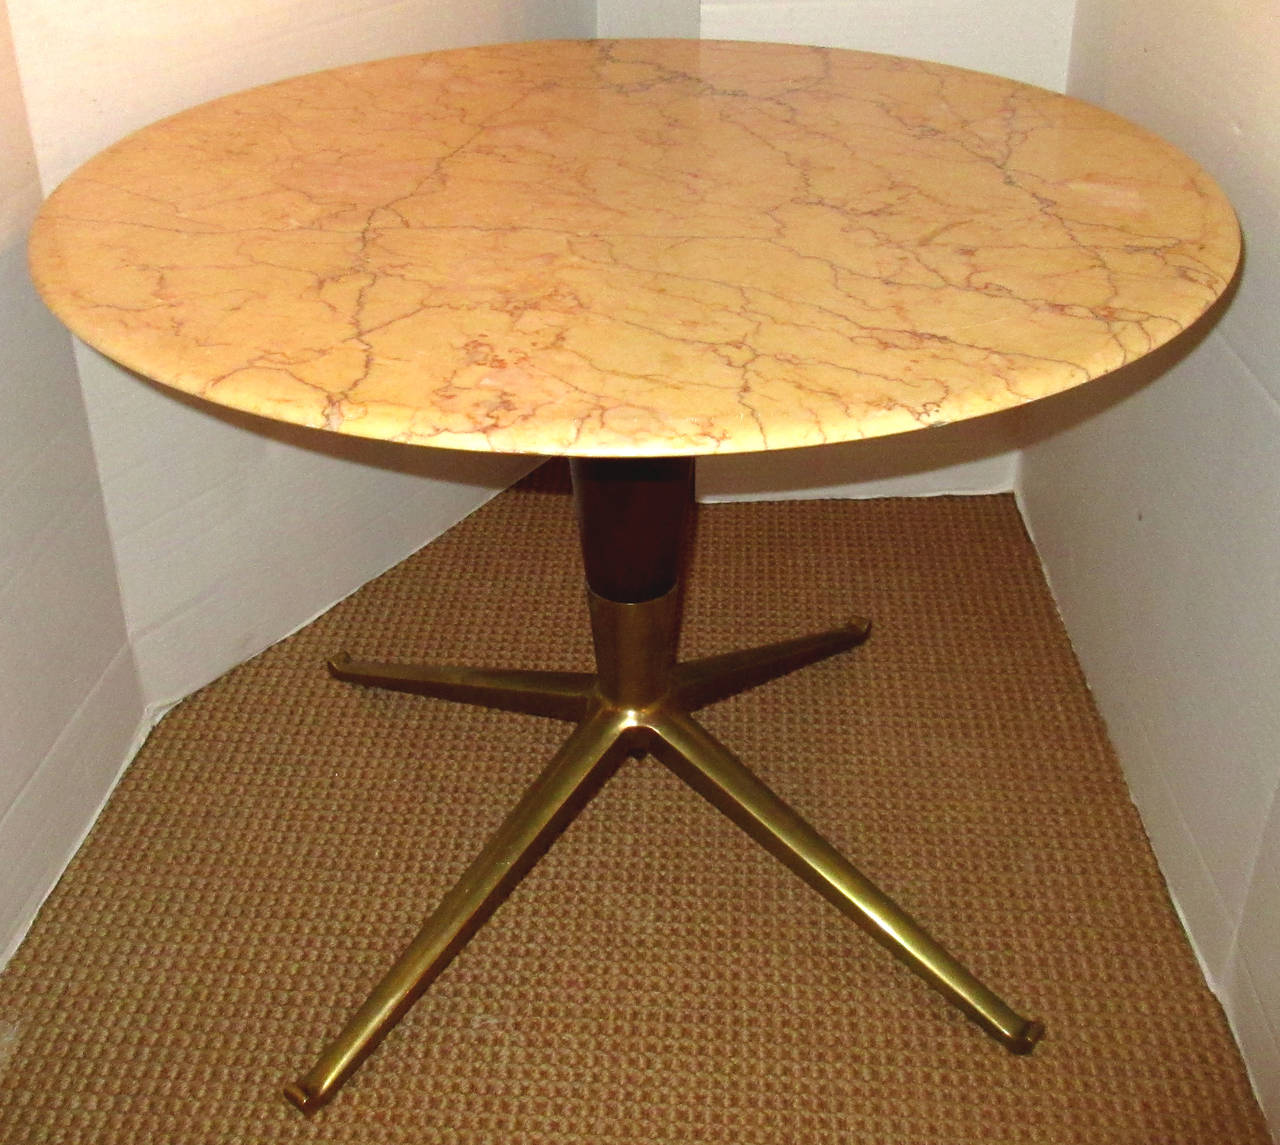 A low, round, honed marble topped end or side table. A tapered wood pedestal base stands on four solid cast brass splayed legs. The marble is heavily veined in tones of cream, copper and gray.